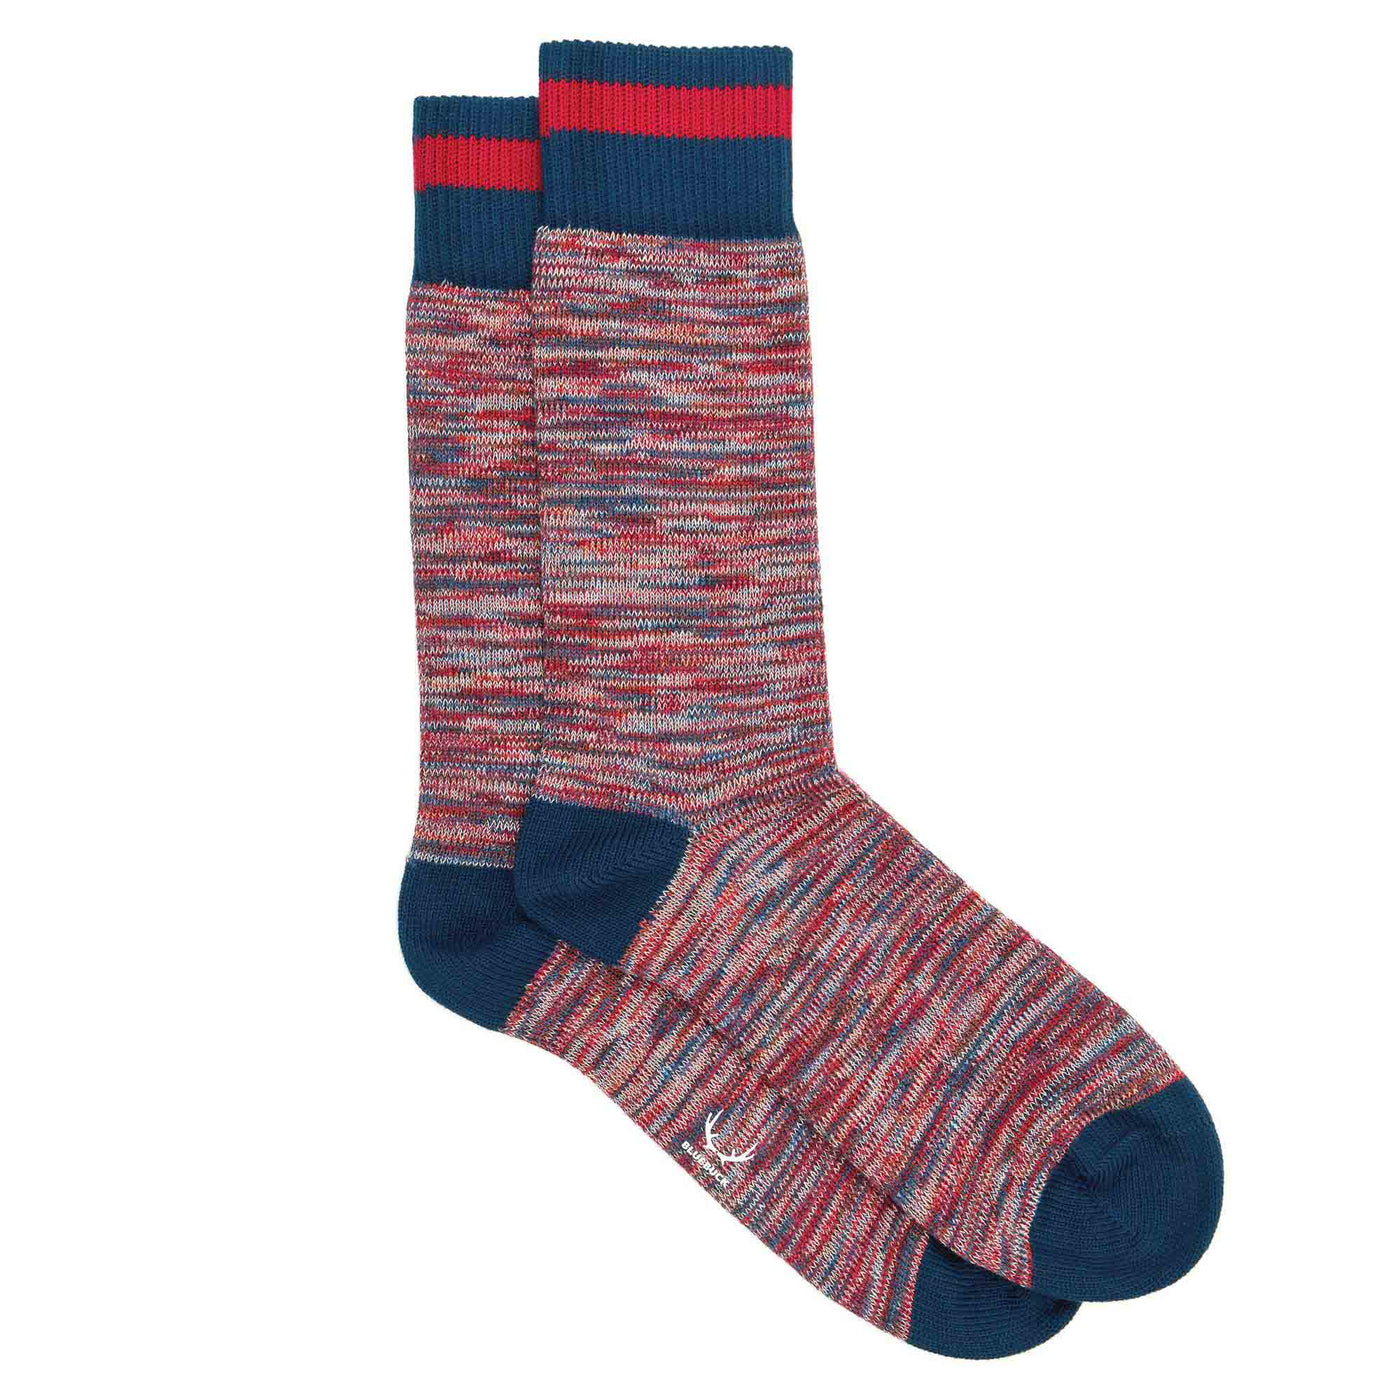 Blue and red organic cotton men"s socks